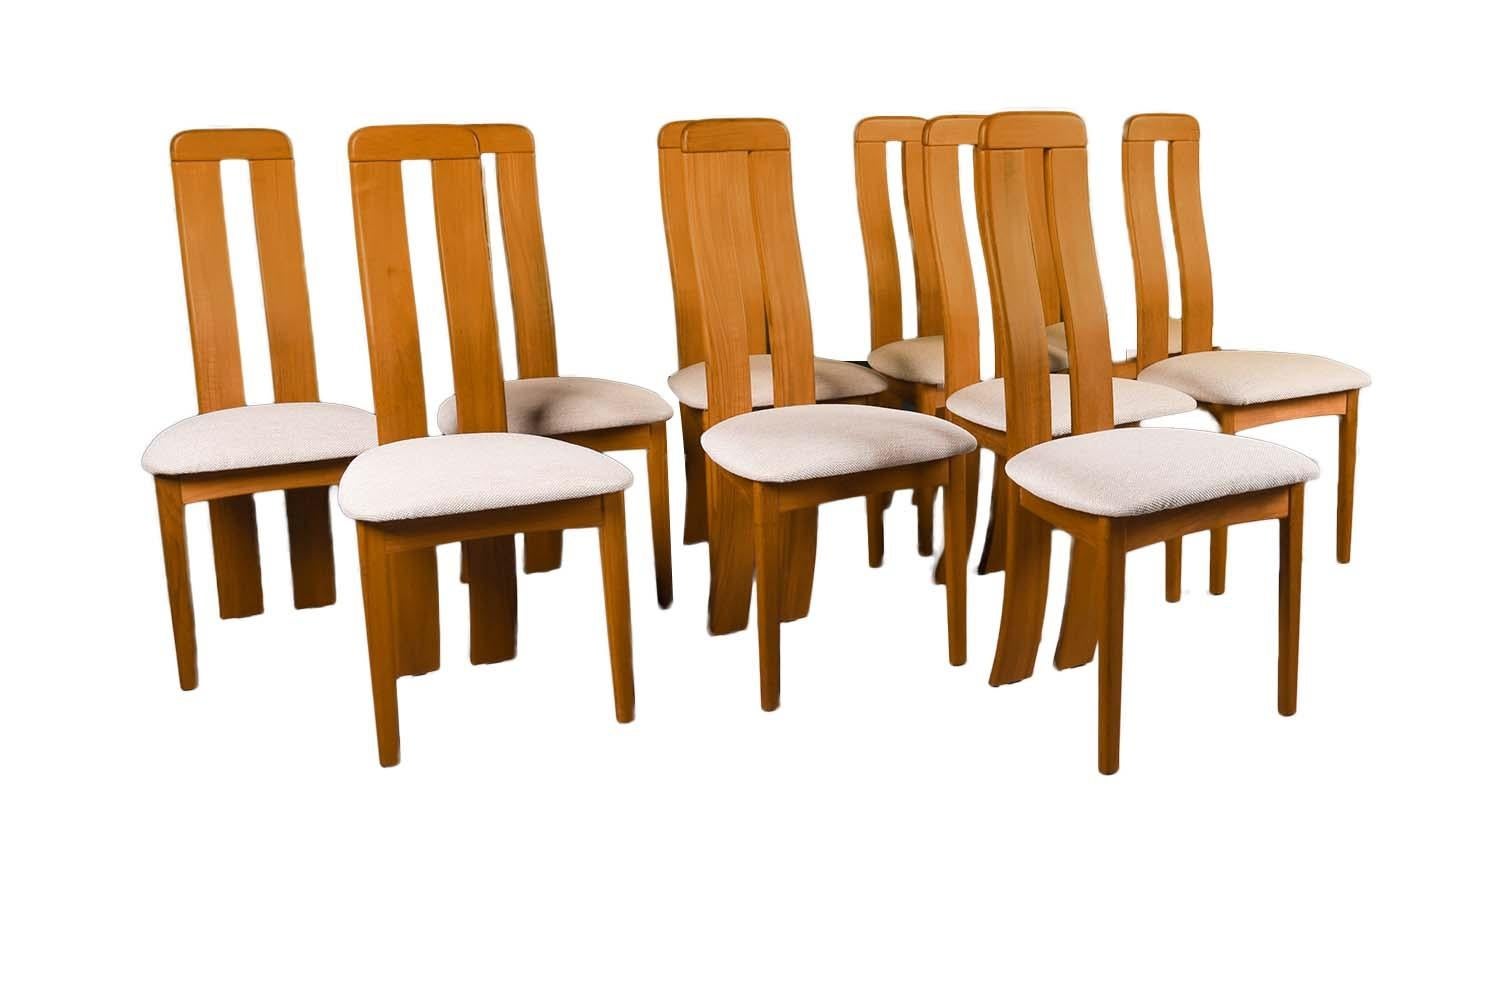 Spectacular set of 10 beautifully sculpted Danish Modern teak-dining chairs designed by Benny Linden. Maker’s label under seat {Benny Linden Design}. Superbly crafted, sculpted, modern teak dining chairs with padded seats. Featuring padded